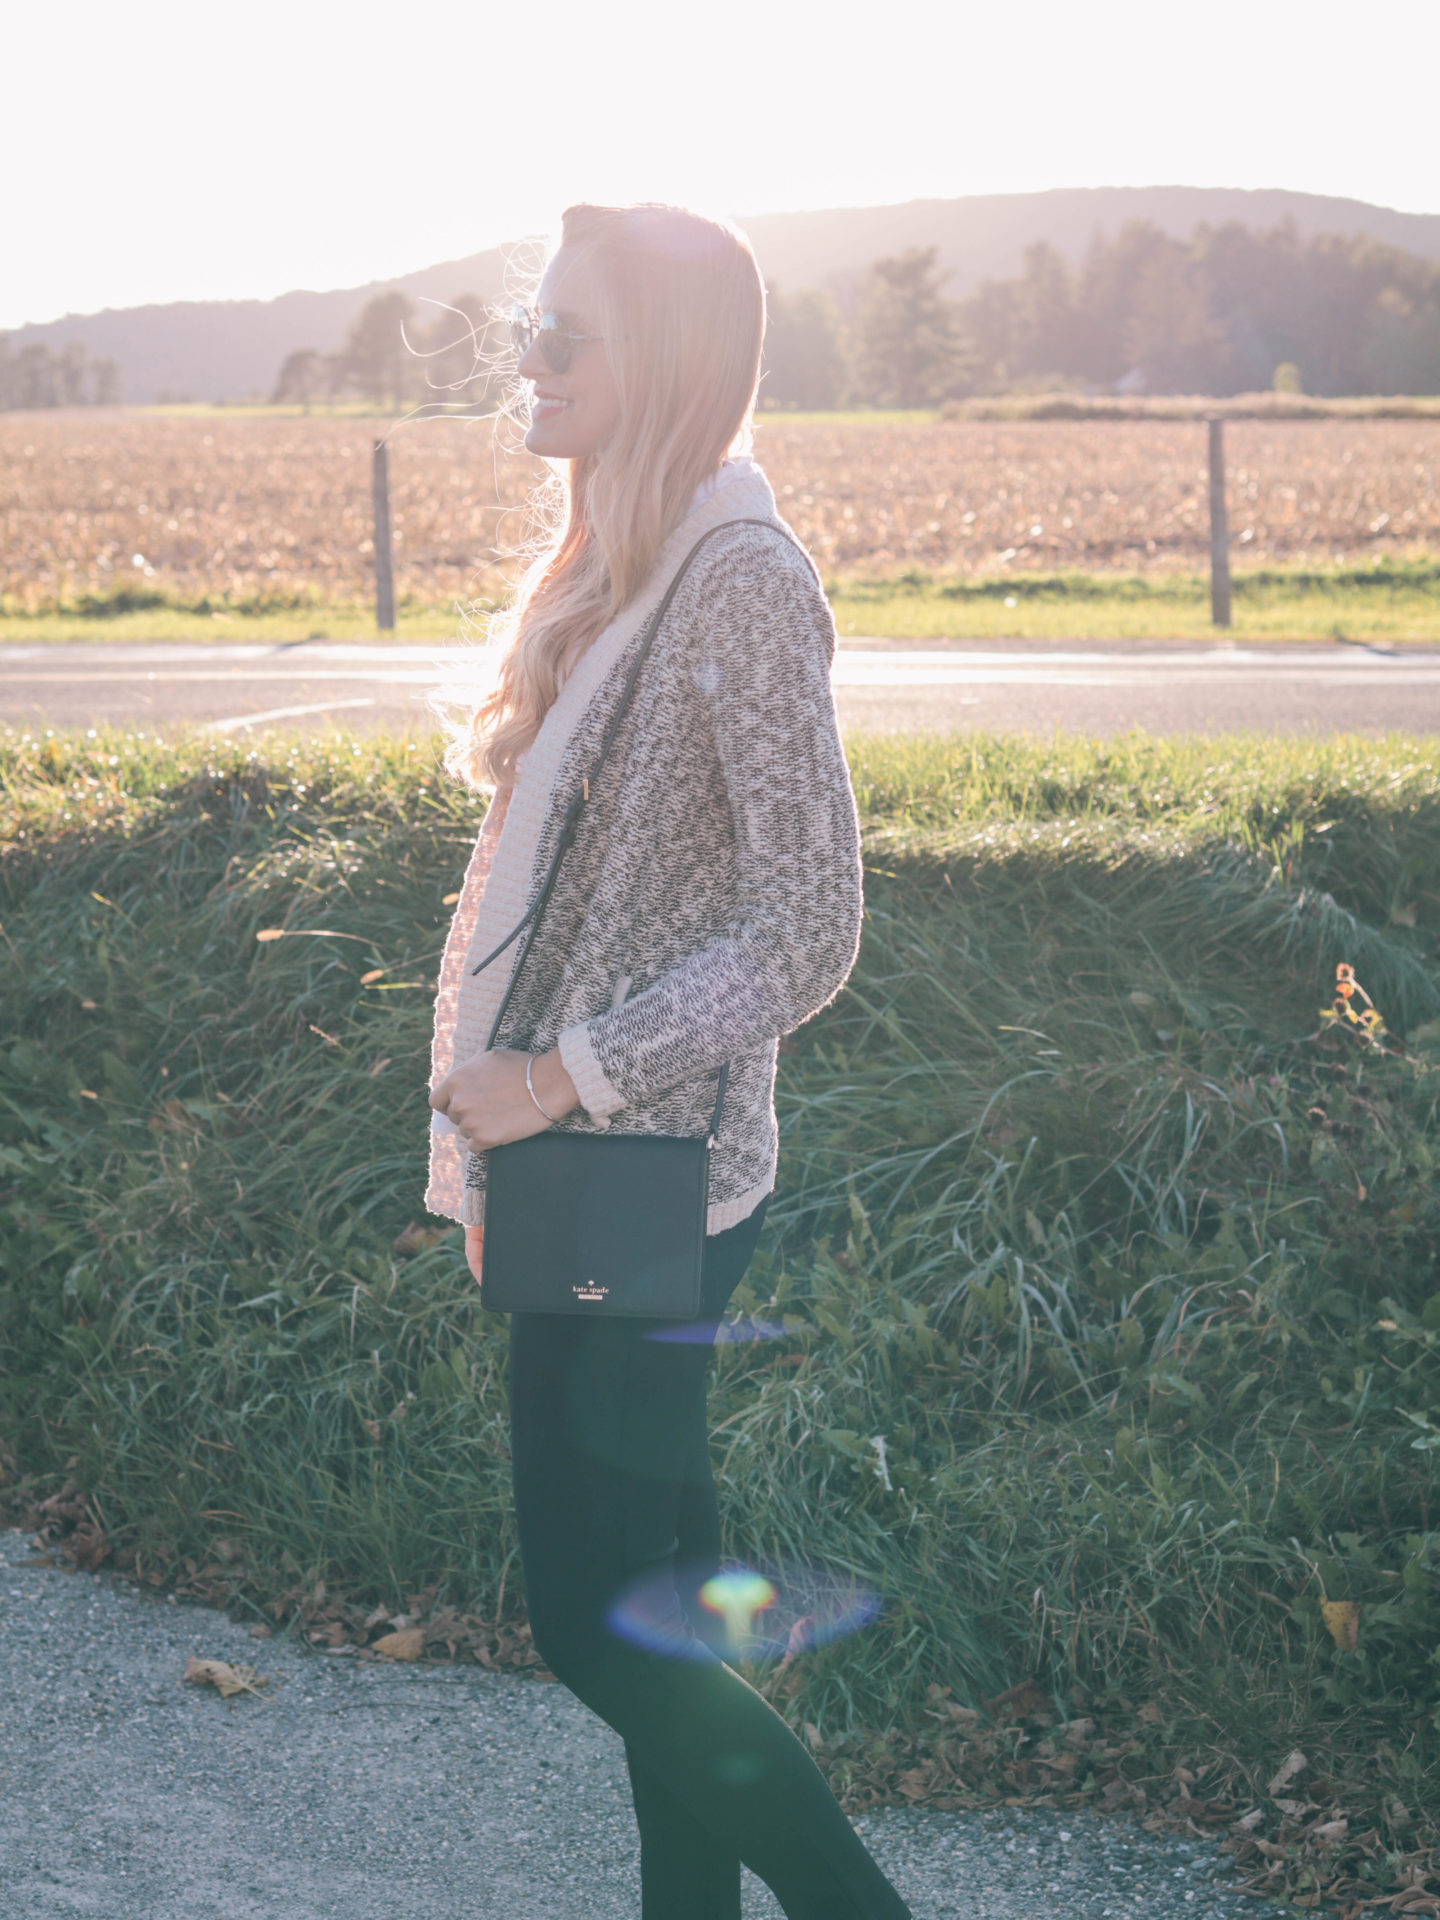 Style blogger, Leigha Gardner, of The Lilac Press on golden hour in the Berkshires and a cozy sweater